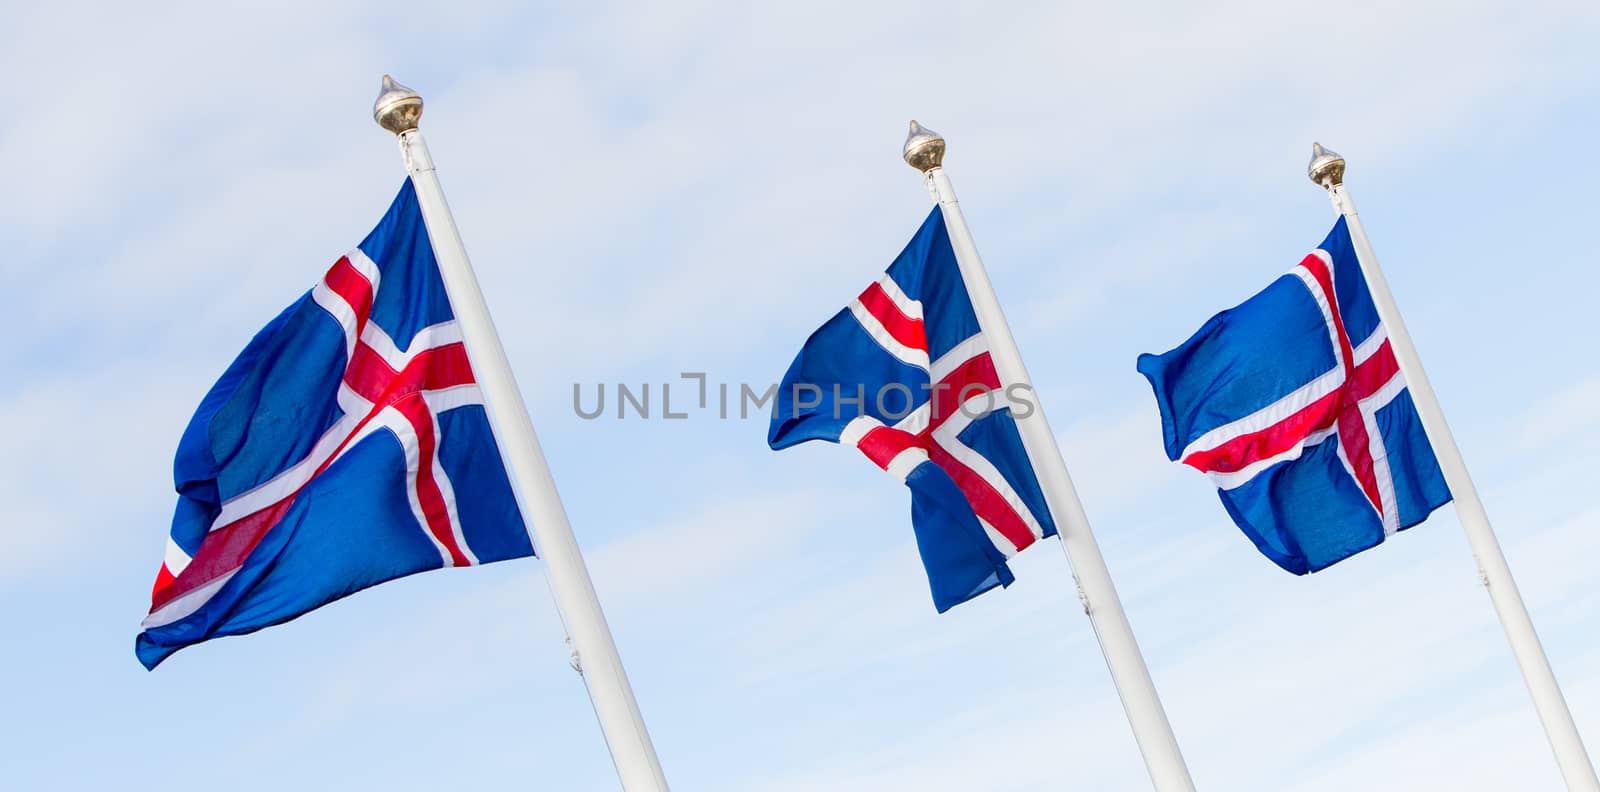 Iceland flag - flag of Iceland by michaklootwijk